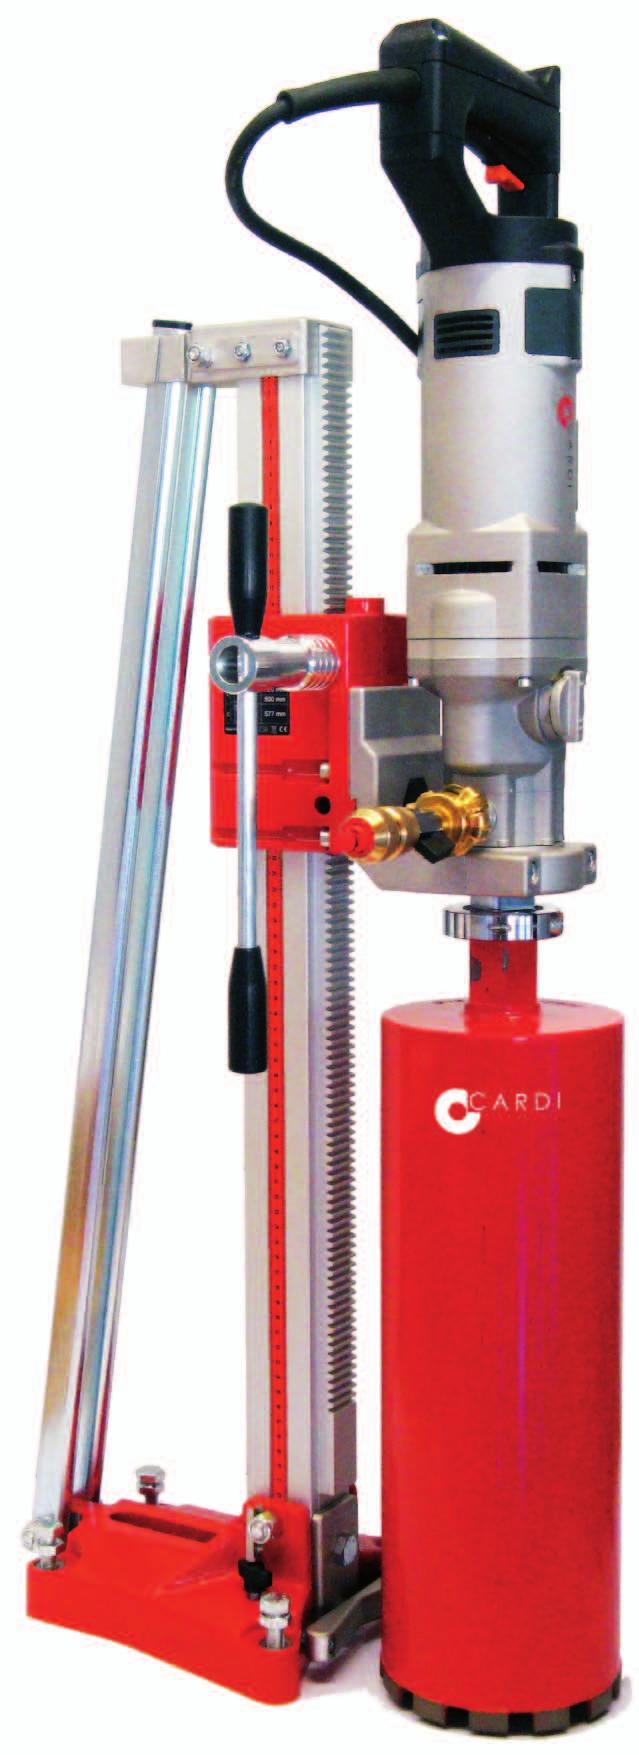 T2200 ME-24 HAND-HELD CORE DRILL DRY & WET DRILLING WITH DUST EXTRACTION SYSTEM DUST FREE EXTRACTION SYSTEM INTEGRATED 2 SPEED ASP.